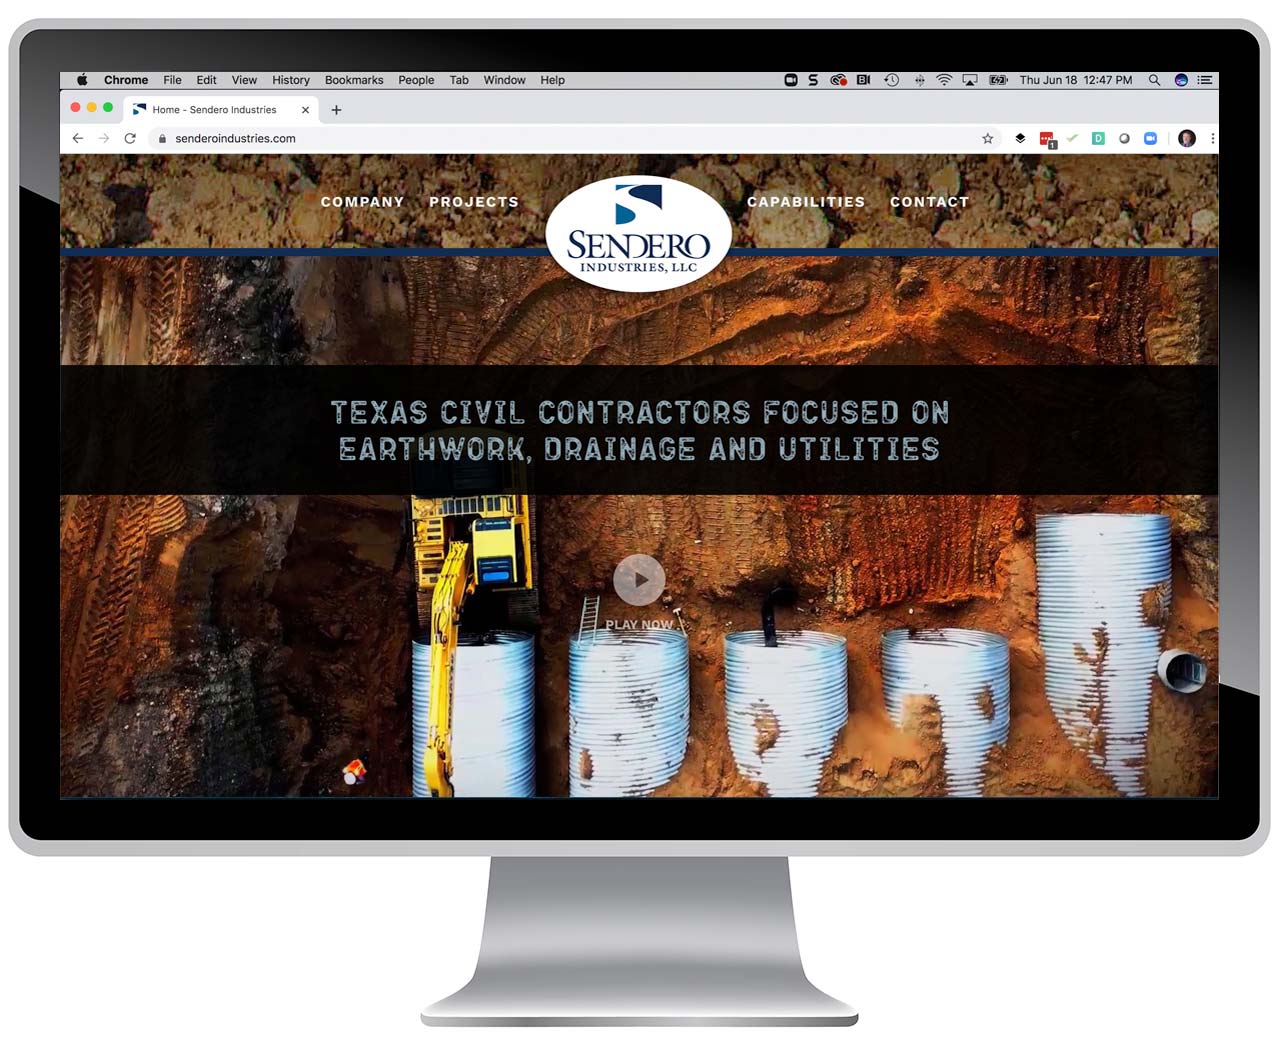 Information page of custom website for construction company.